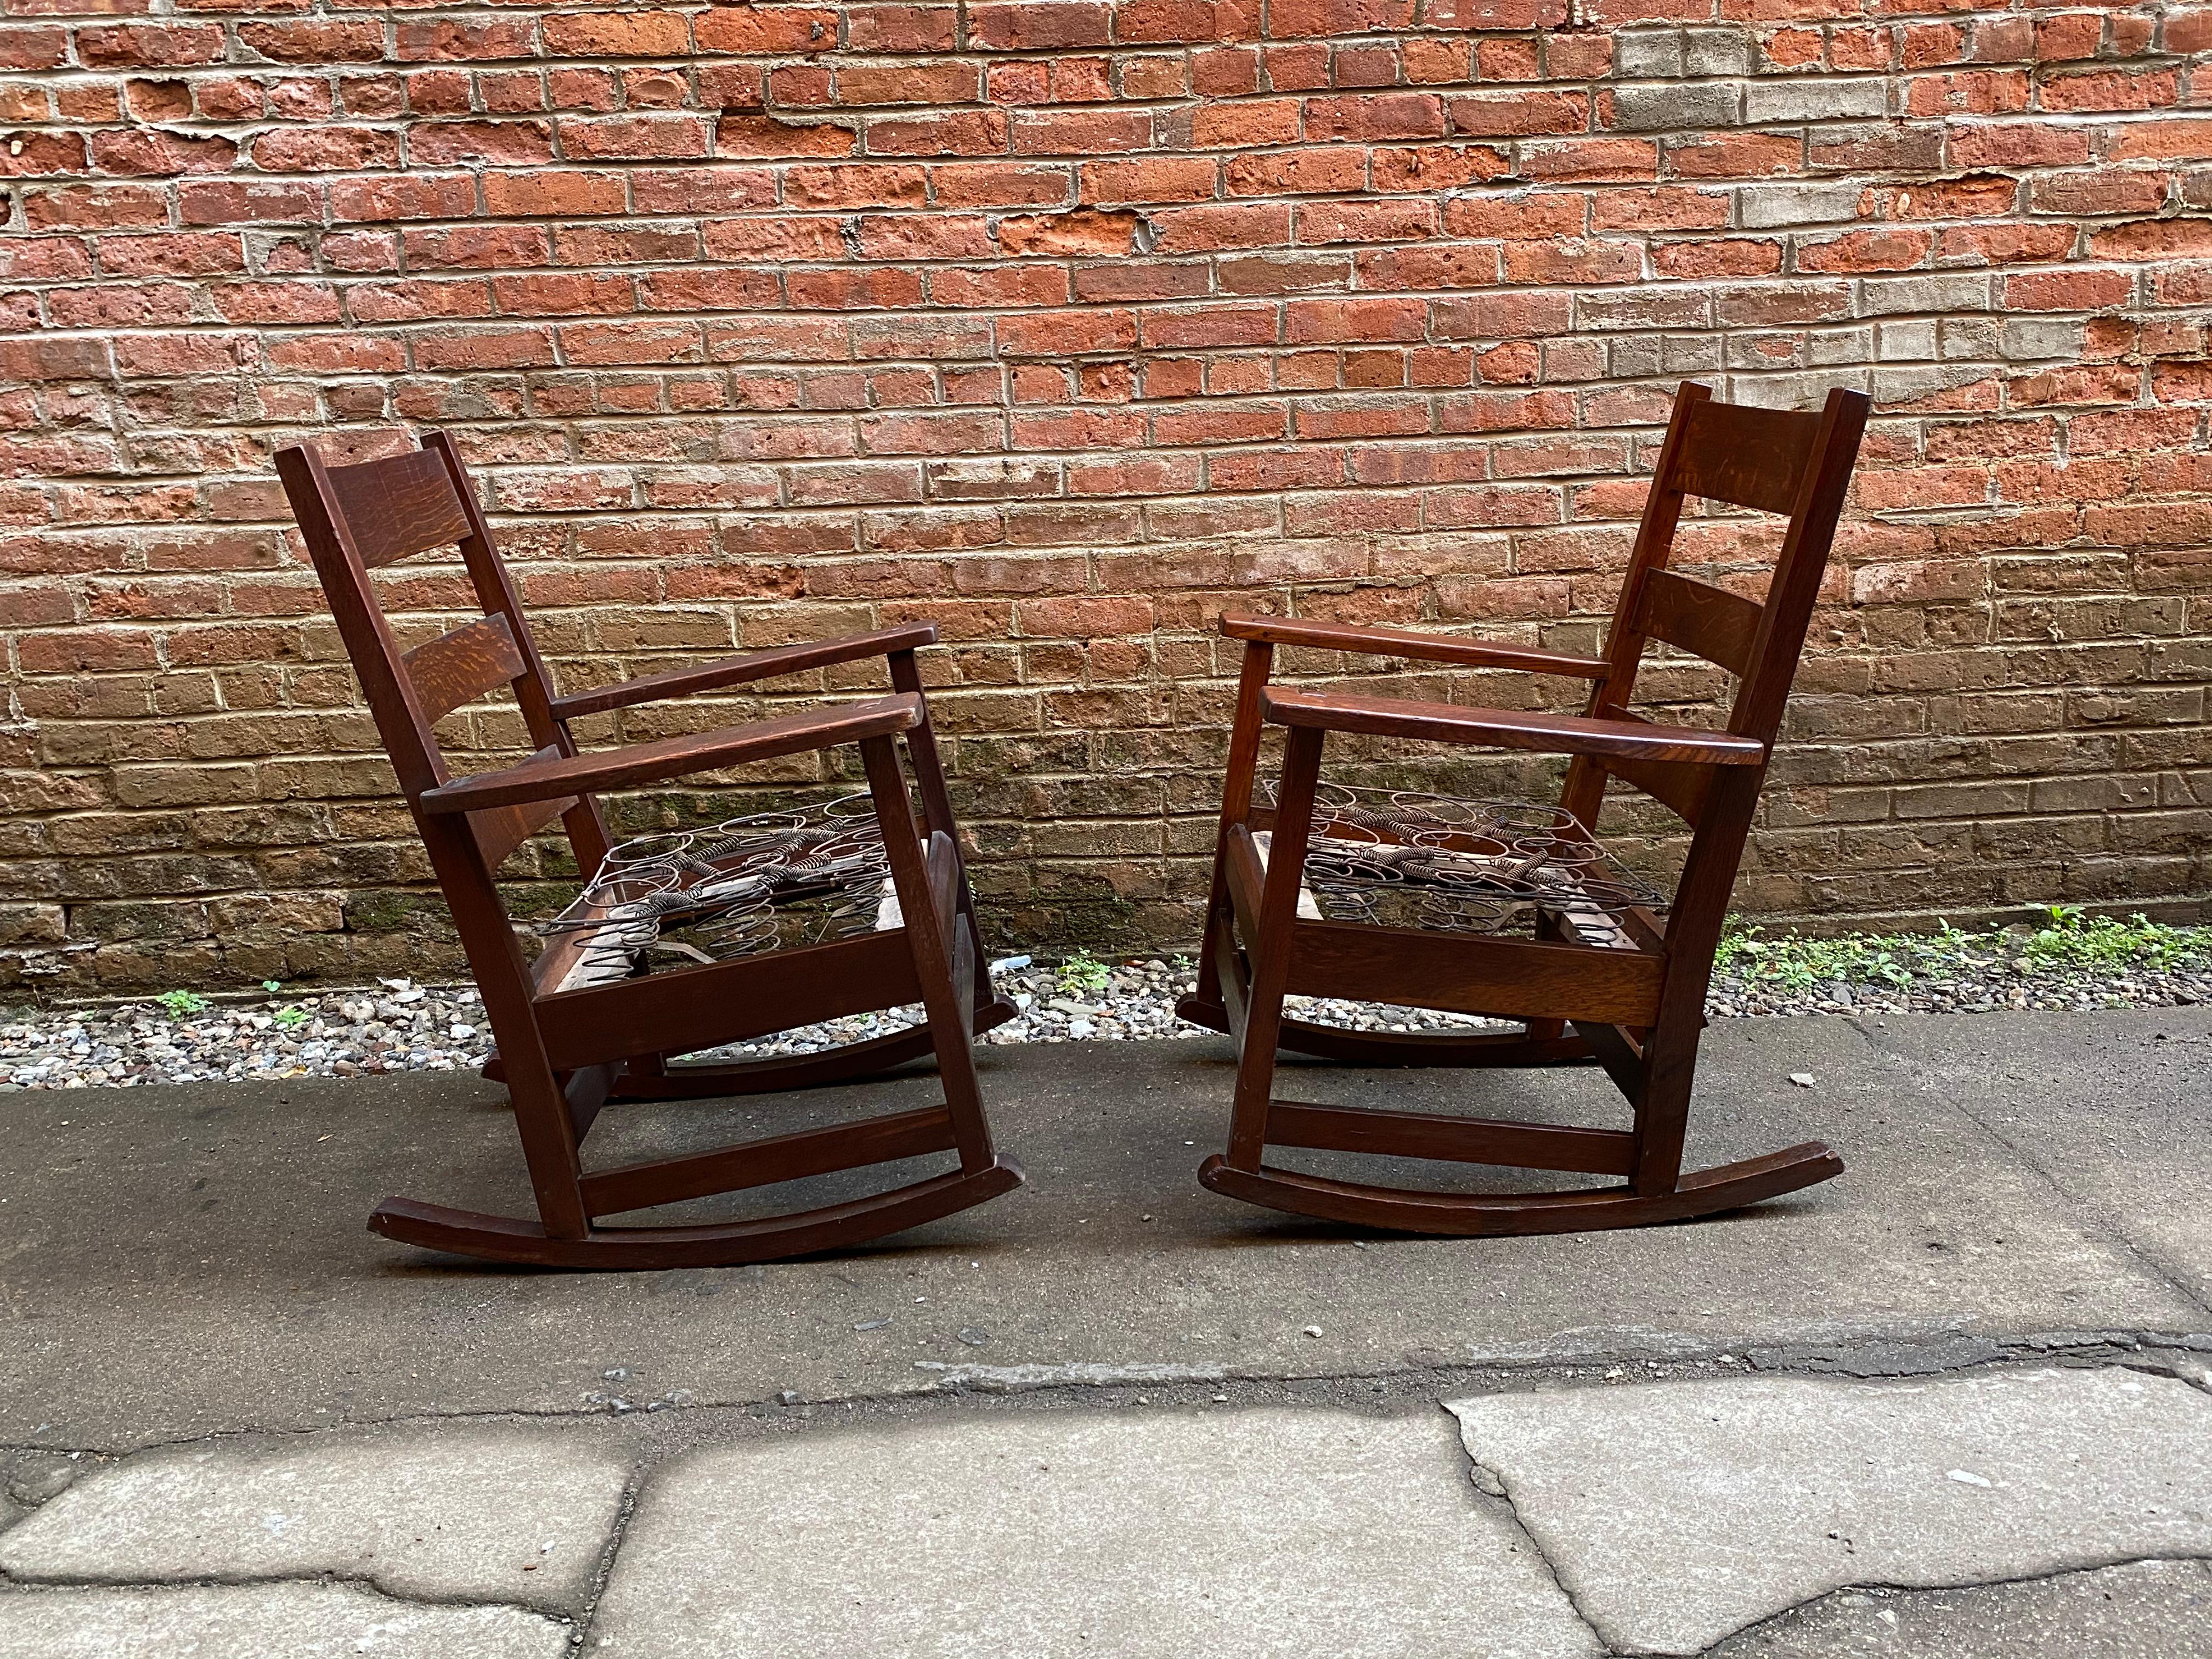 A fine pair of solid oak Gustav Stickley rocking chairs. Excellent dark original finish. Structurally sound and sturdy frames. Mortise and tenon and dowel construction. Original drop in spring seat I am having the seats done in a lightweight cotton